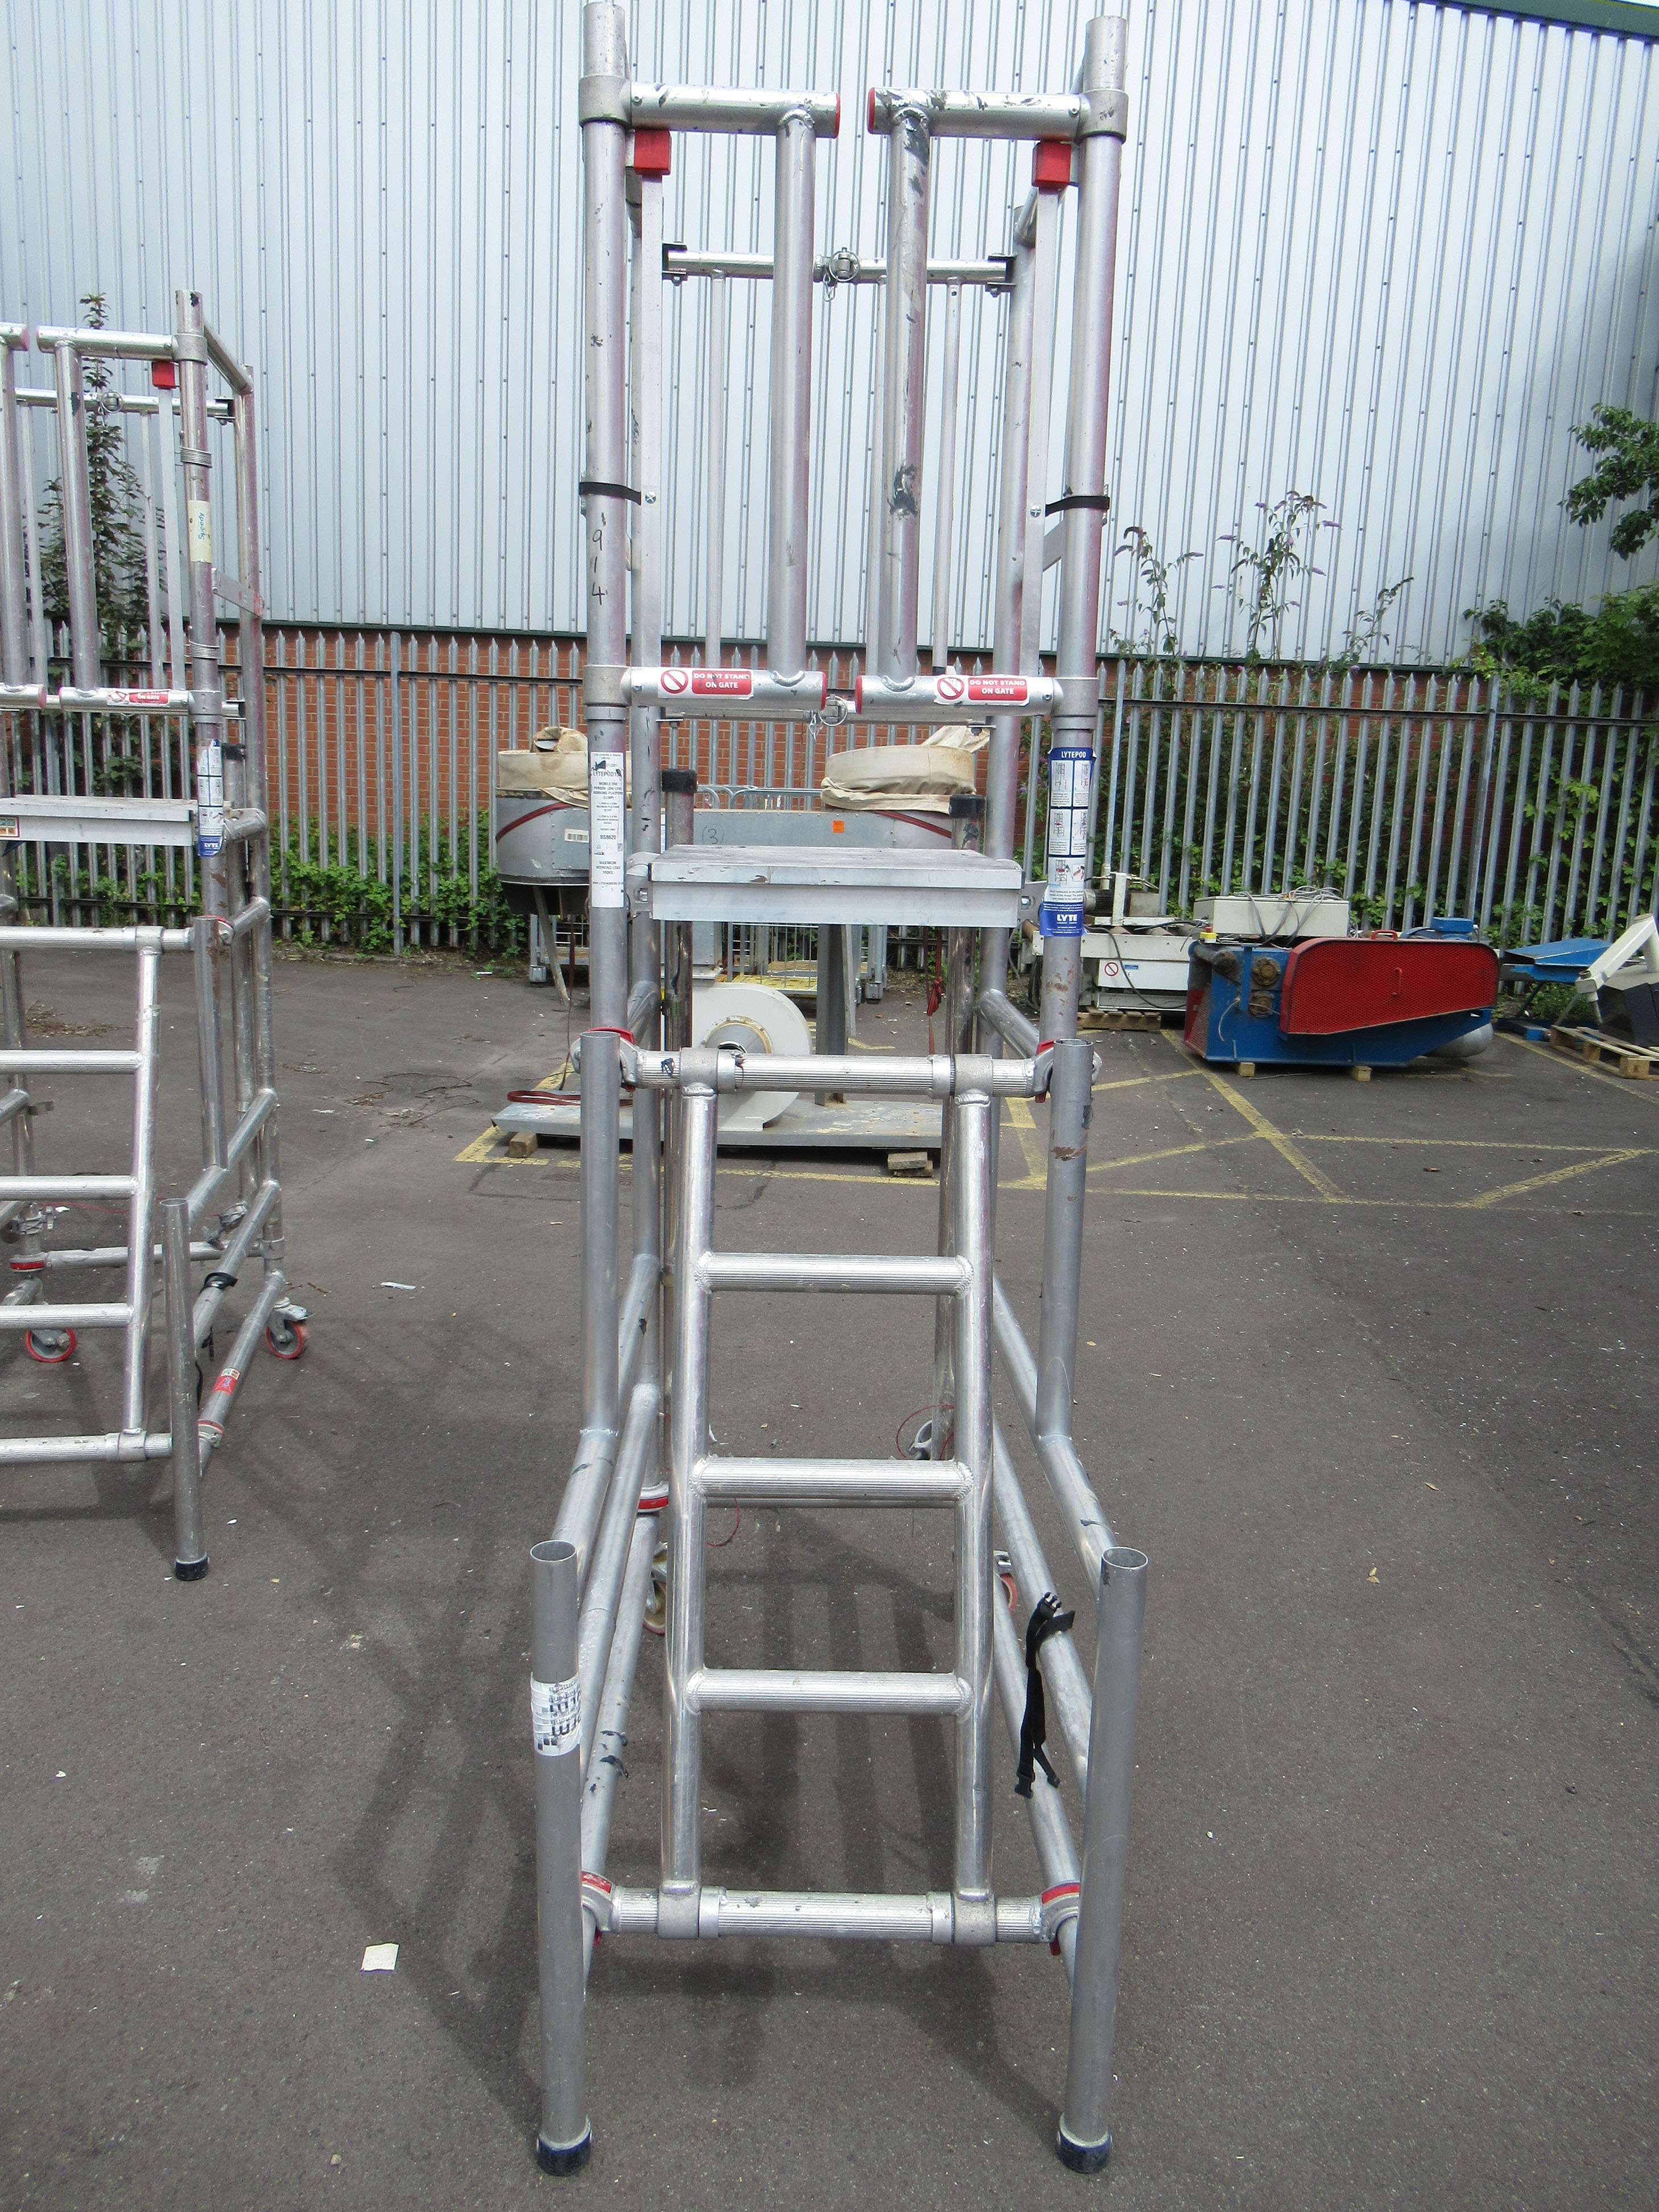 LYTEPOD15X Mobile 1 Person Low Level Working Platform. Max working load 150kg